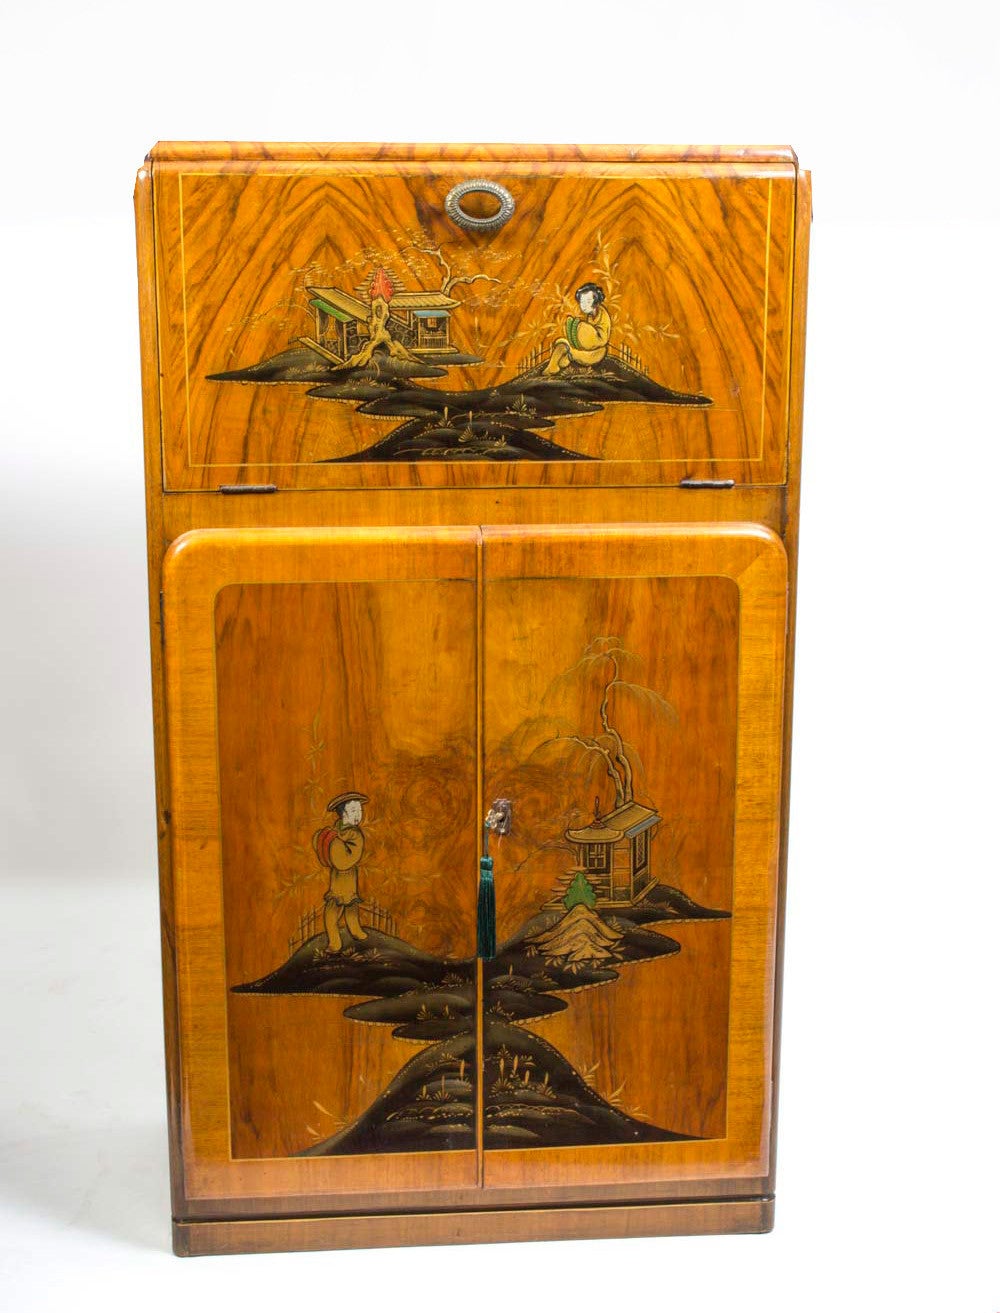 This is a fantastic antique Art Deco walnut cocktail cabinet with Chinoiserie lacquered decoration, circa 1920 in date. 

There is a paper label on the back with the details of the original owner and a the name of the manufacturer as 'Rivington